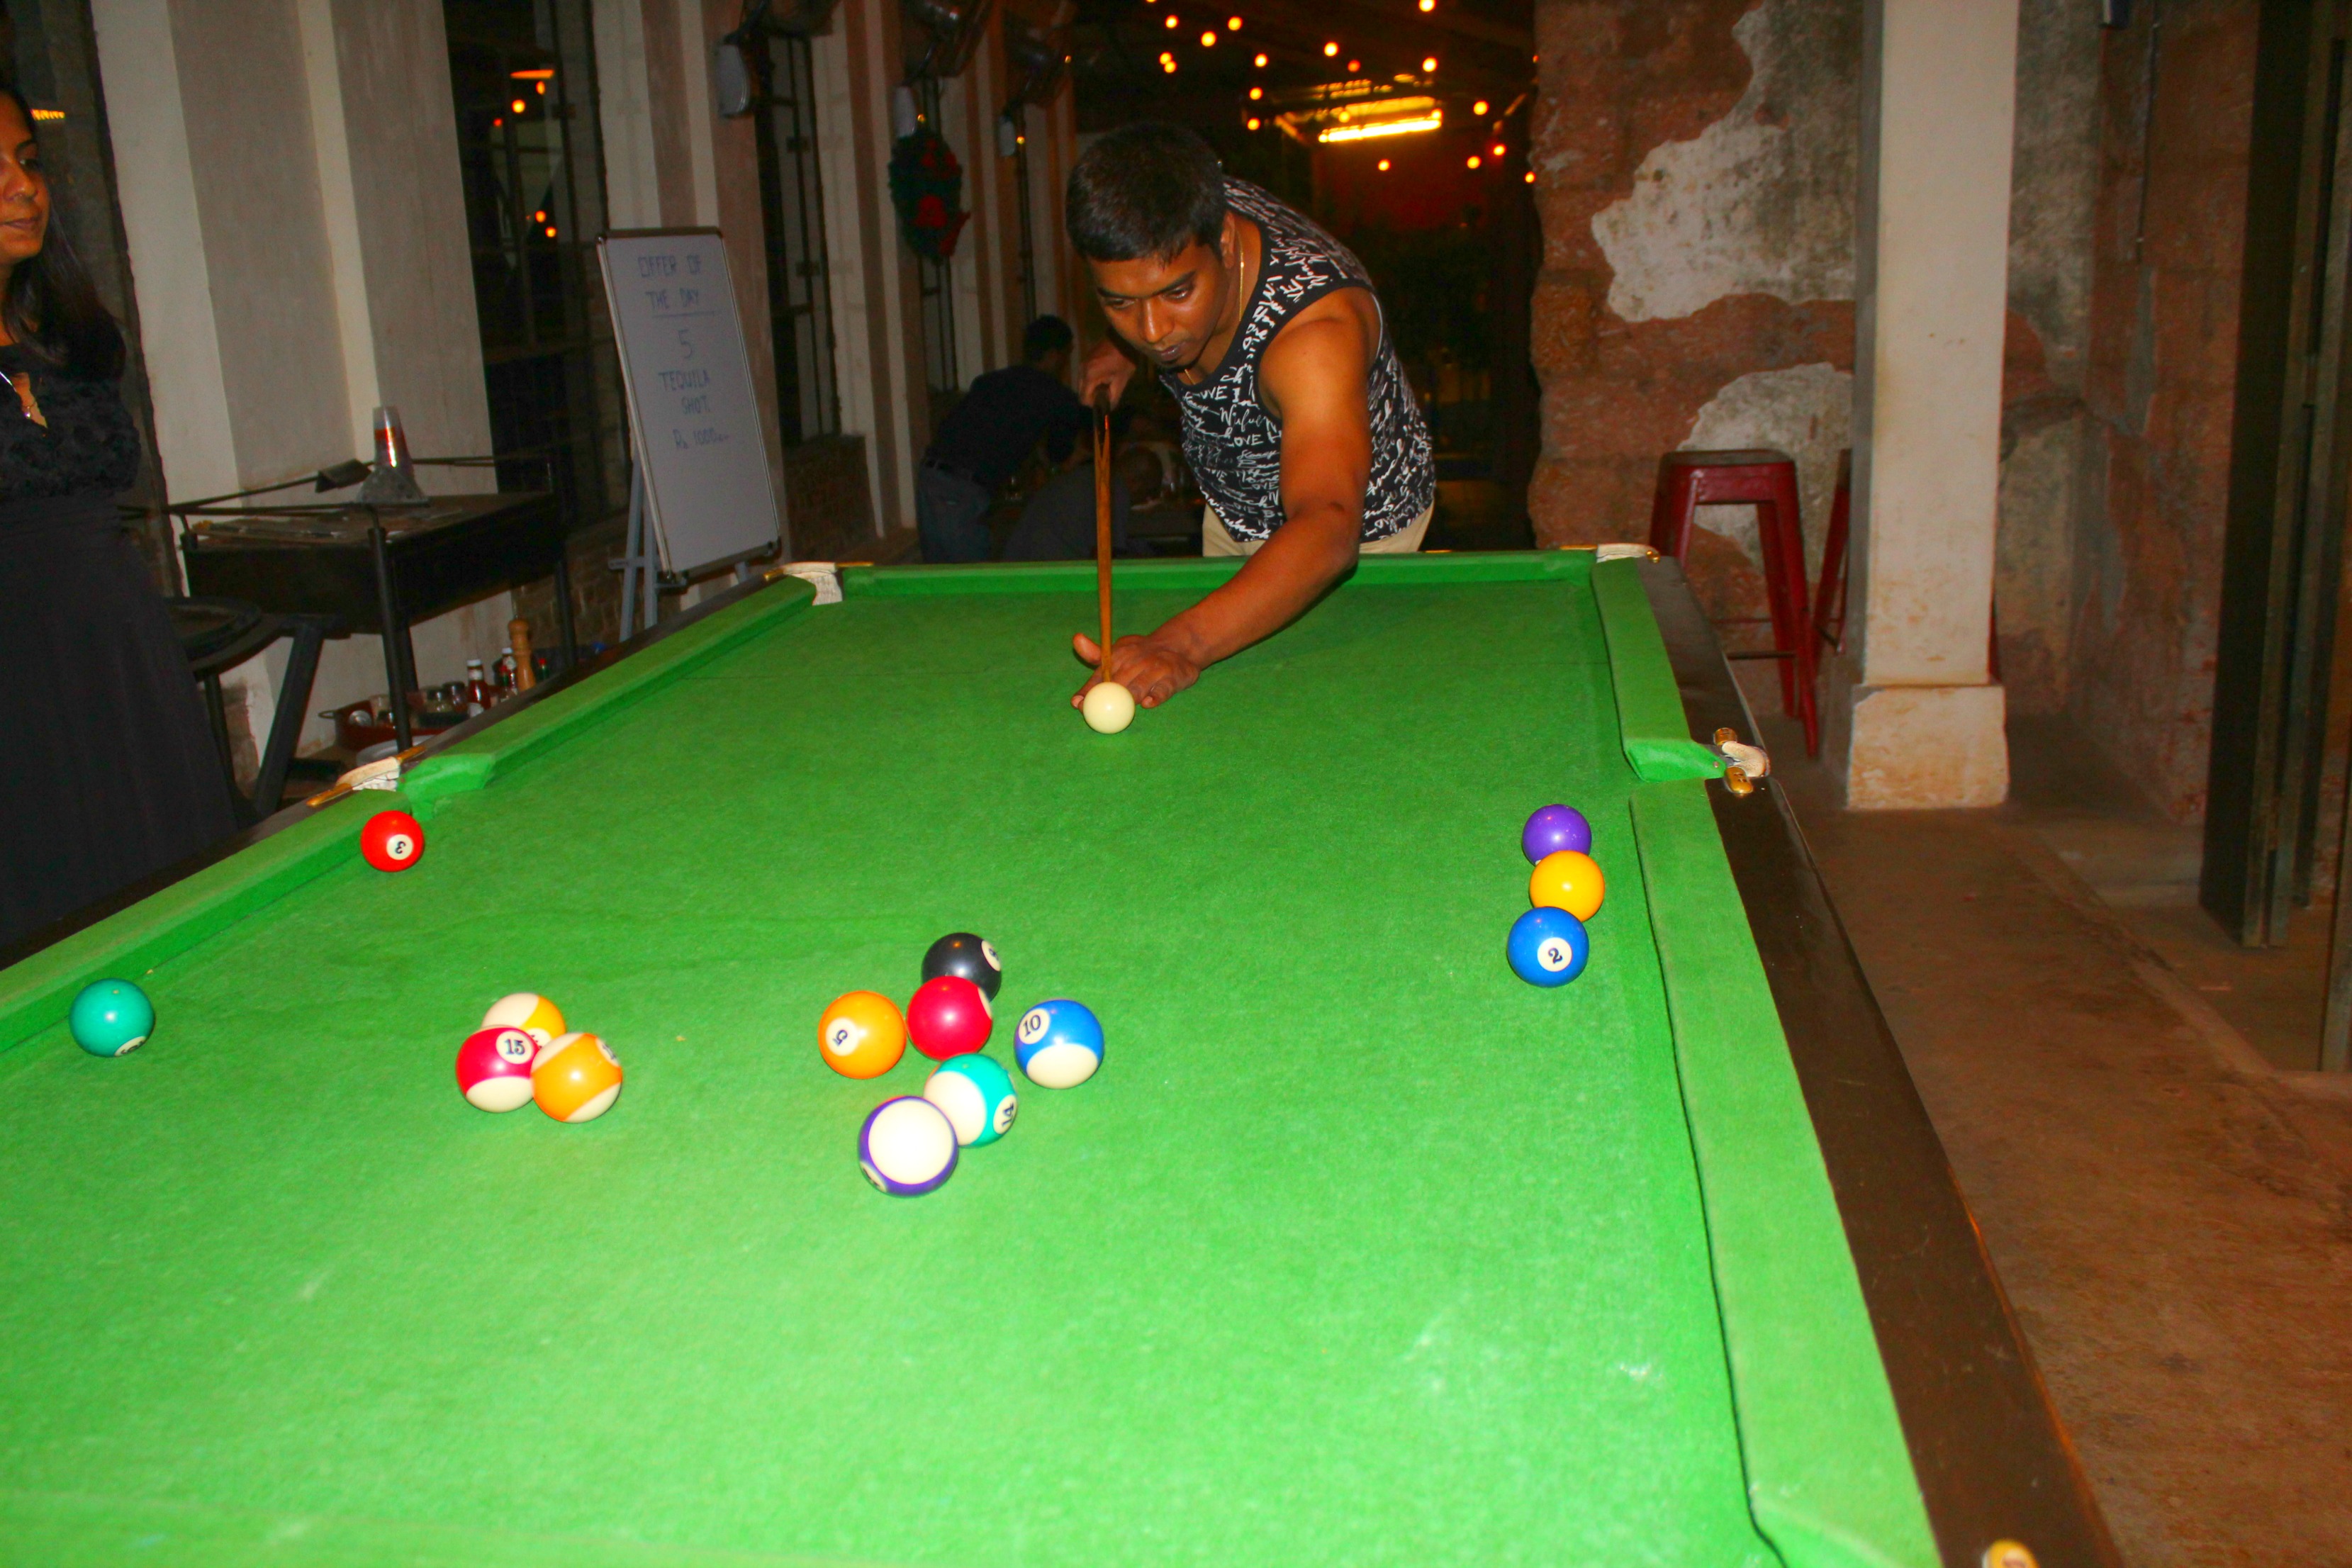 Grab a Beer and go for a pool game.